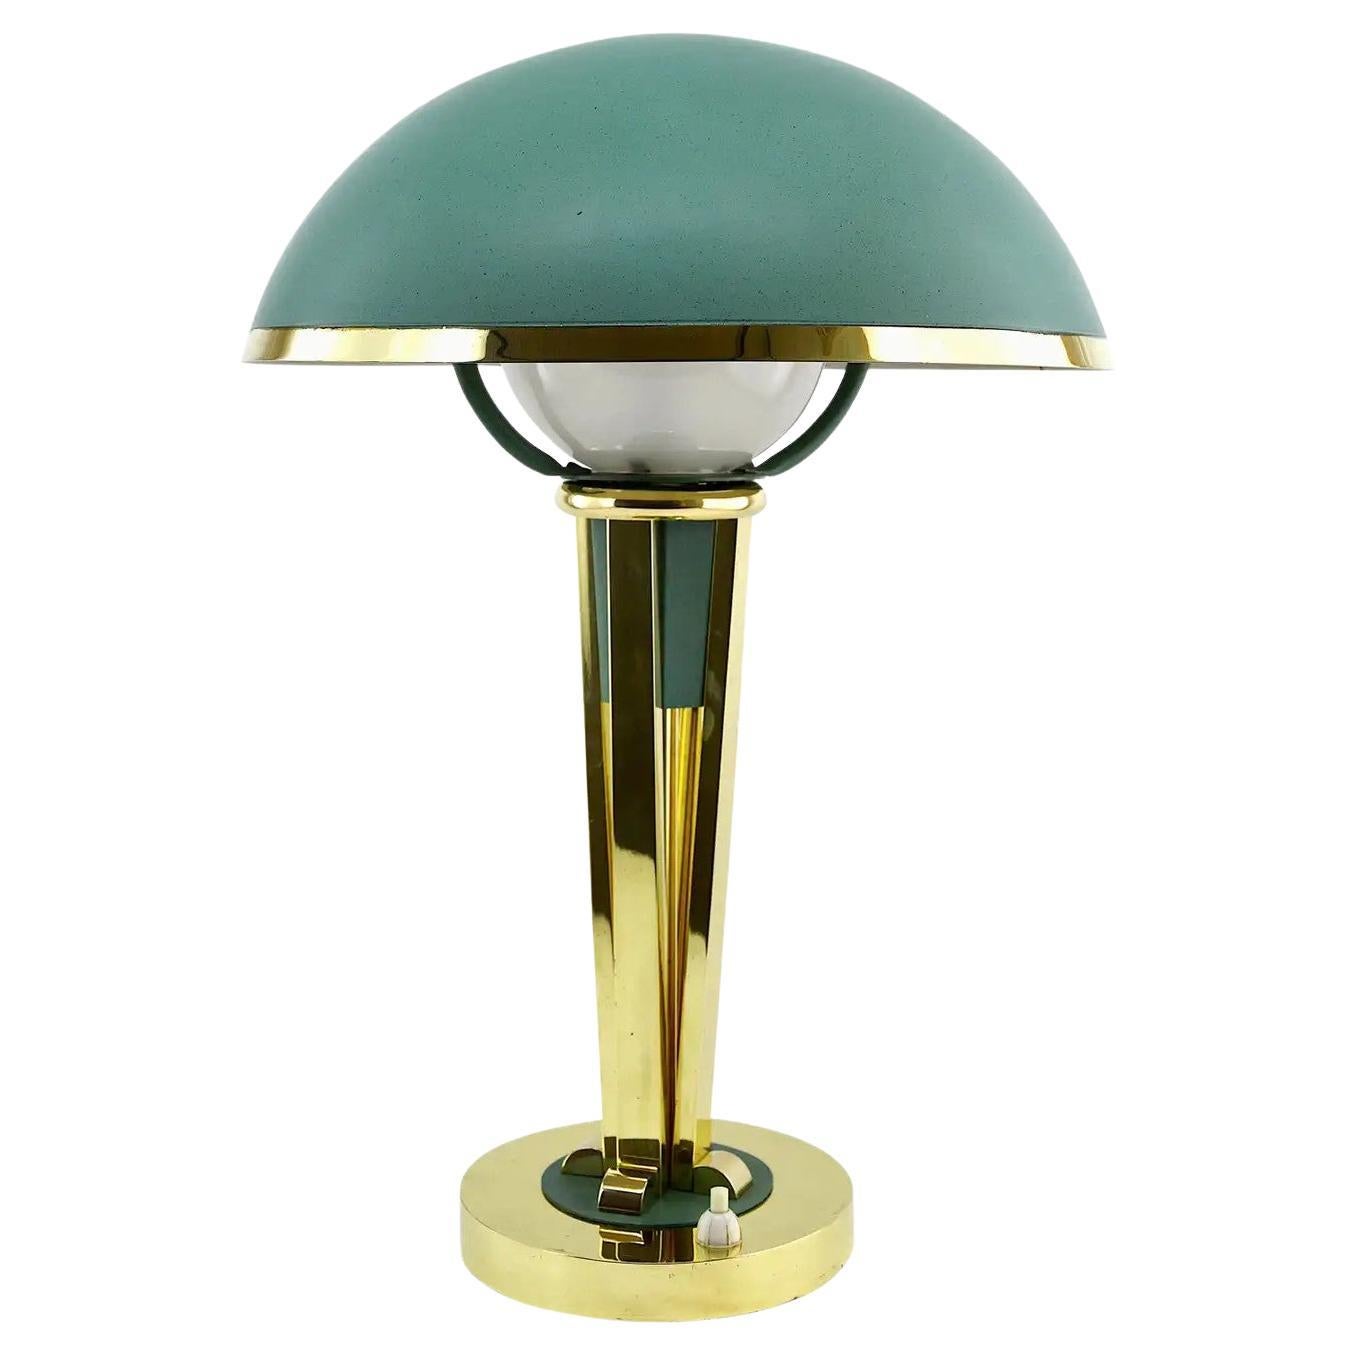 Jacques Adnet French Art Deco Desk or Table Lamp, circa 1940